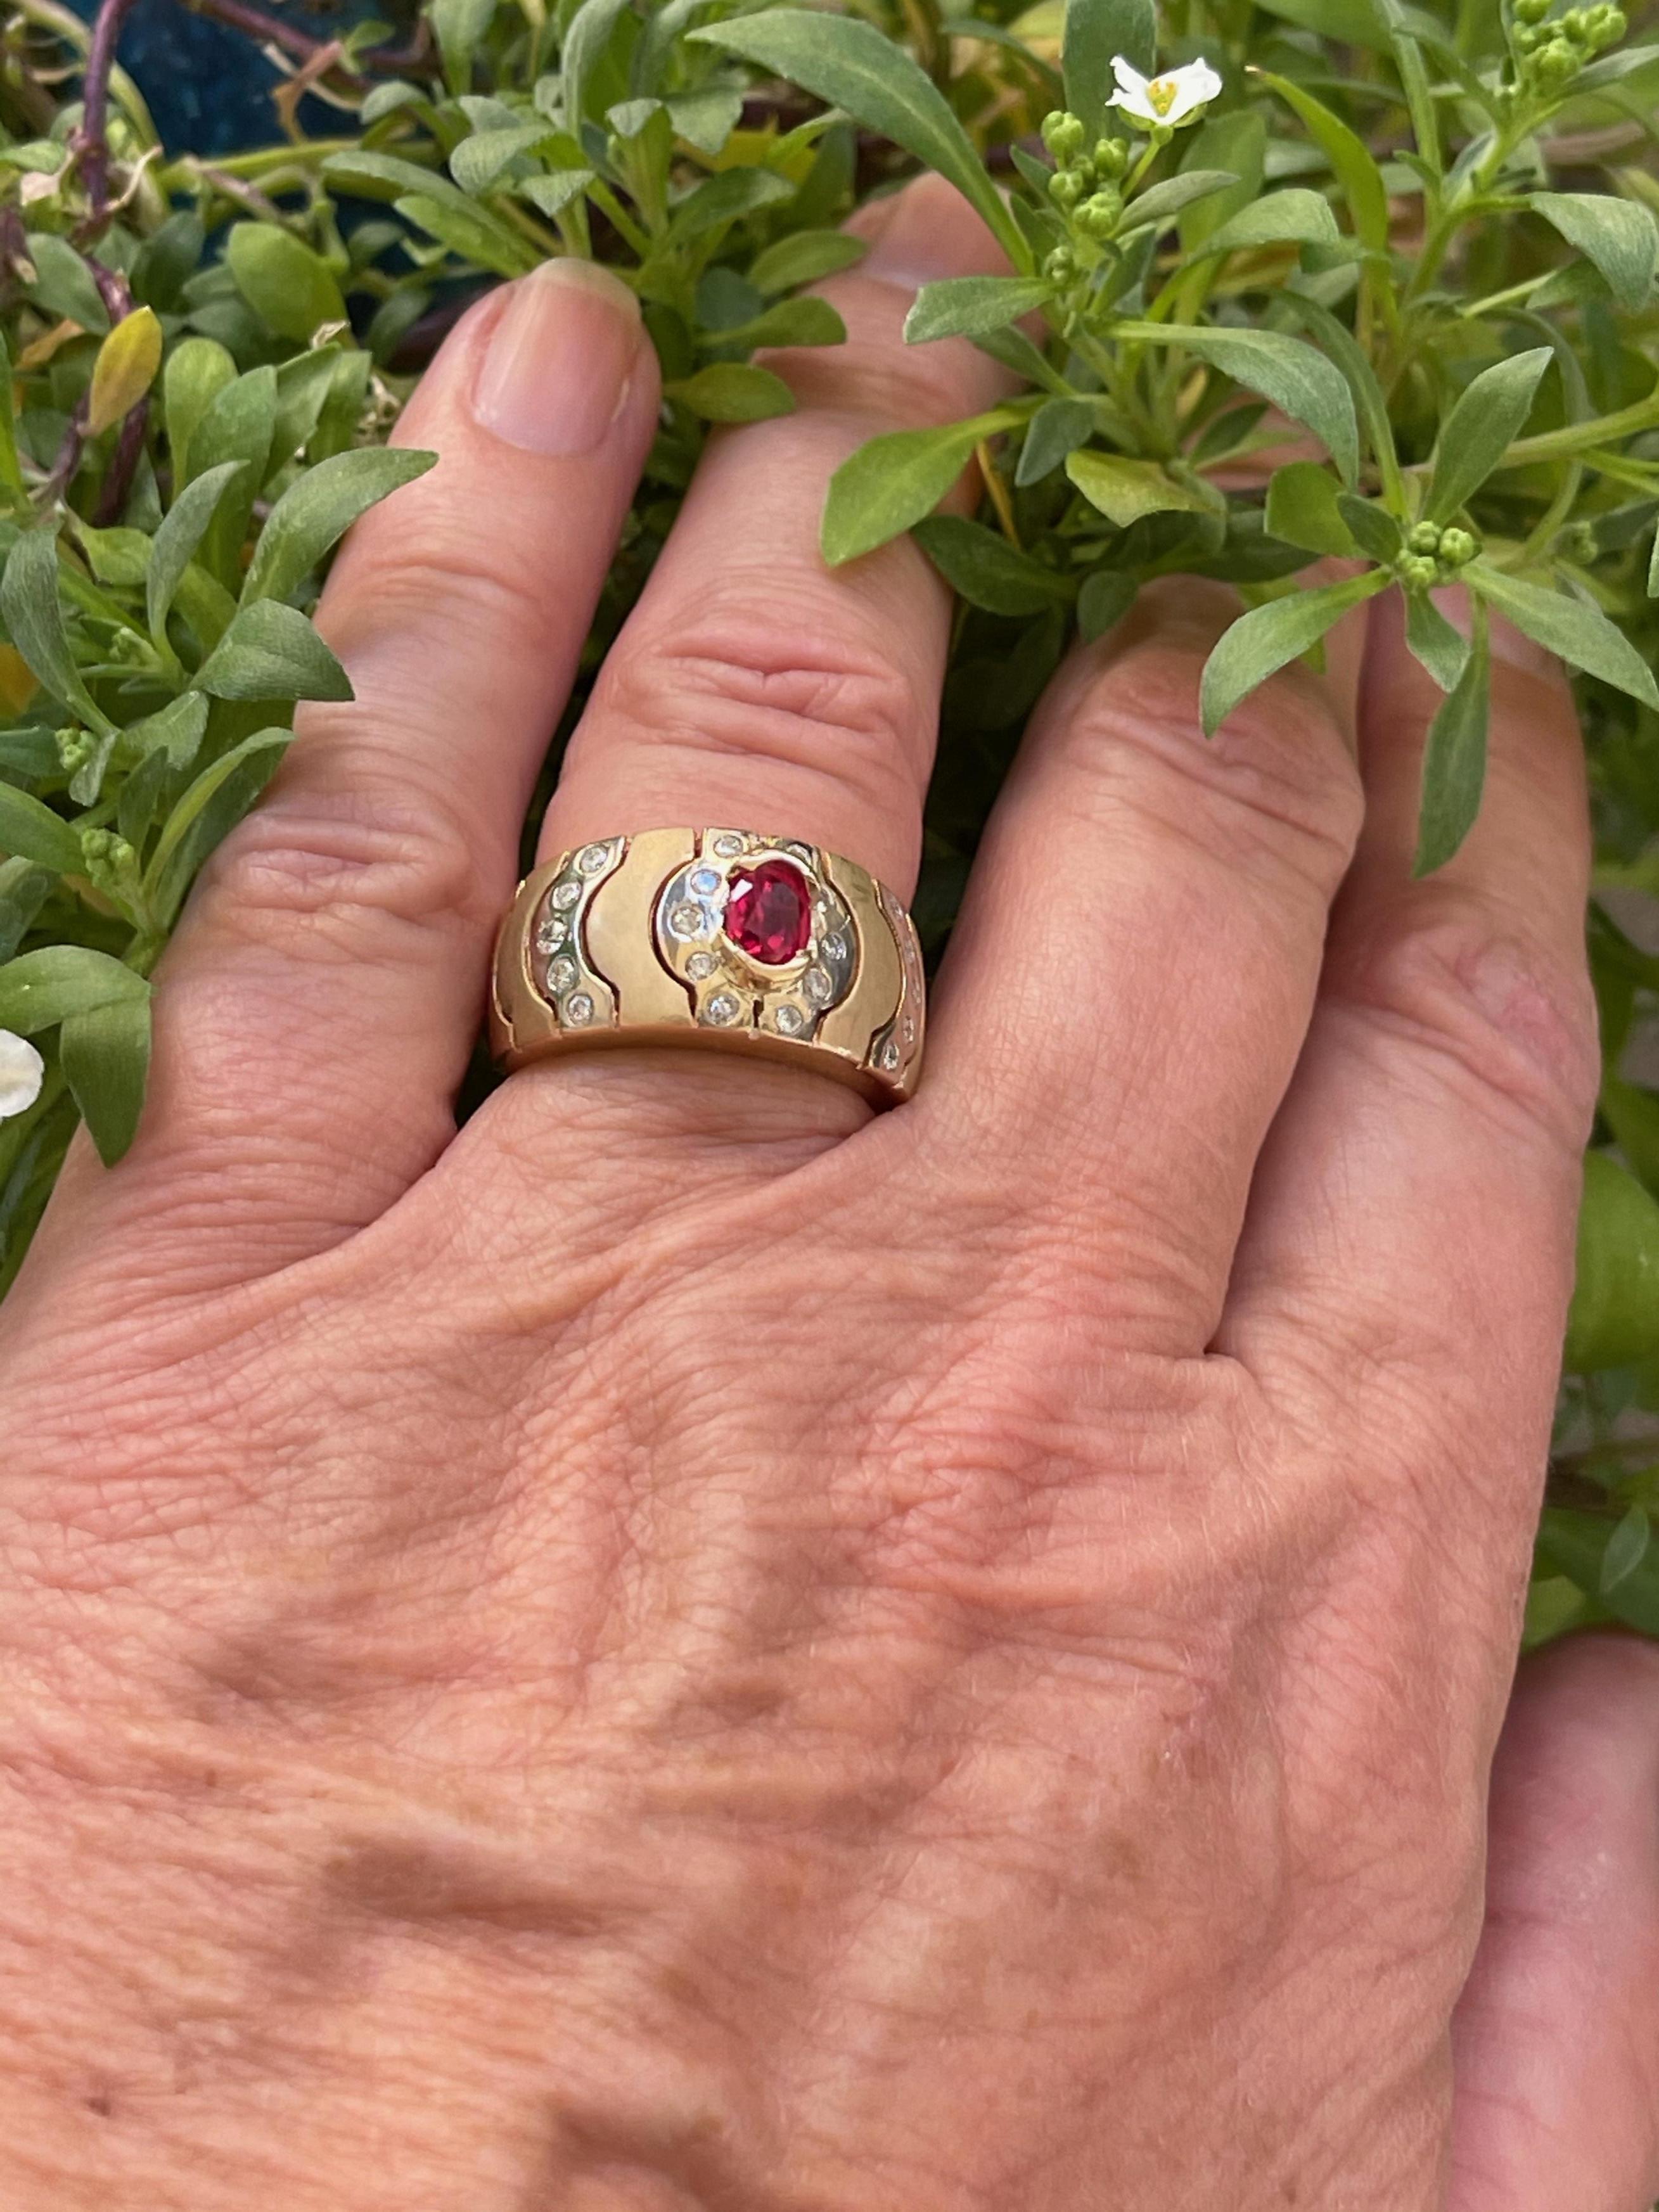 We bought this modern two-tone ring in 14-karat gold. Elke liked the way the matted gold dome was done and we replaced the pongs for the center stone with half-bezels to make the design more streamlined and more wearable. The 0.58 carats red Burmis